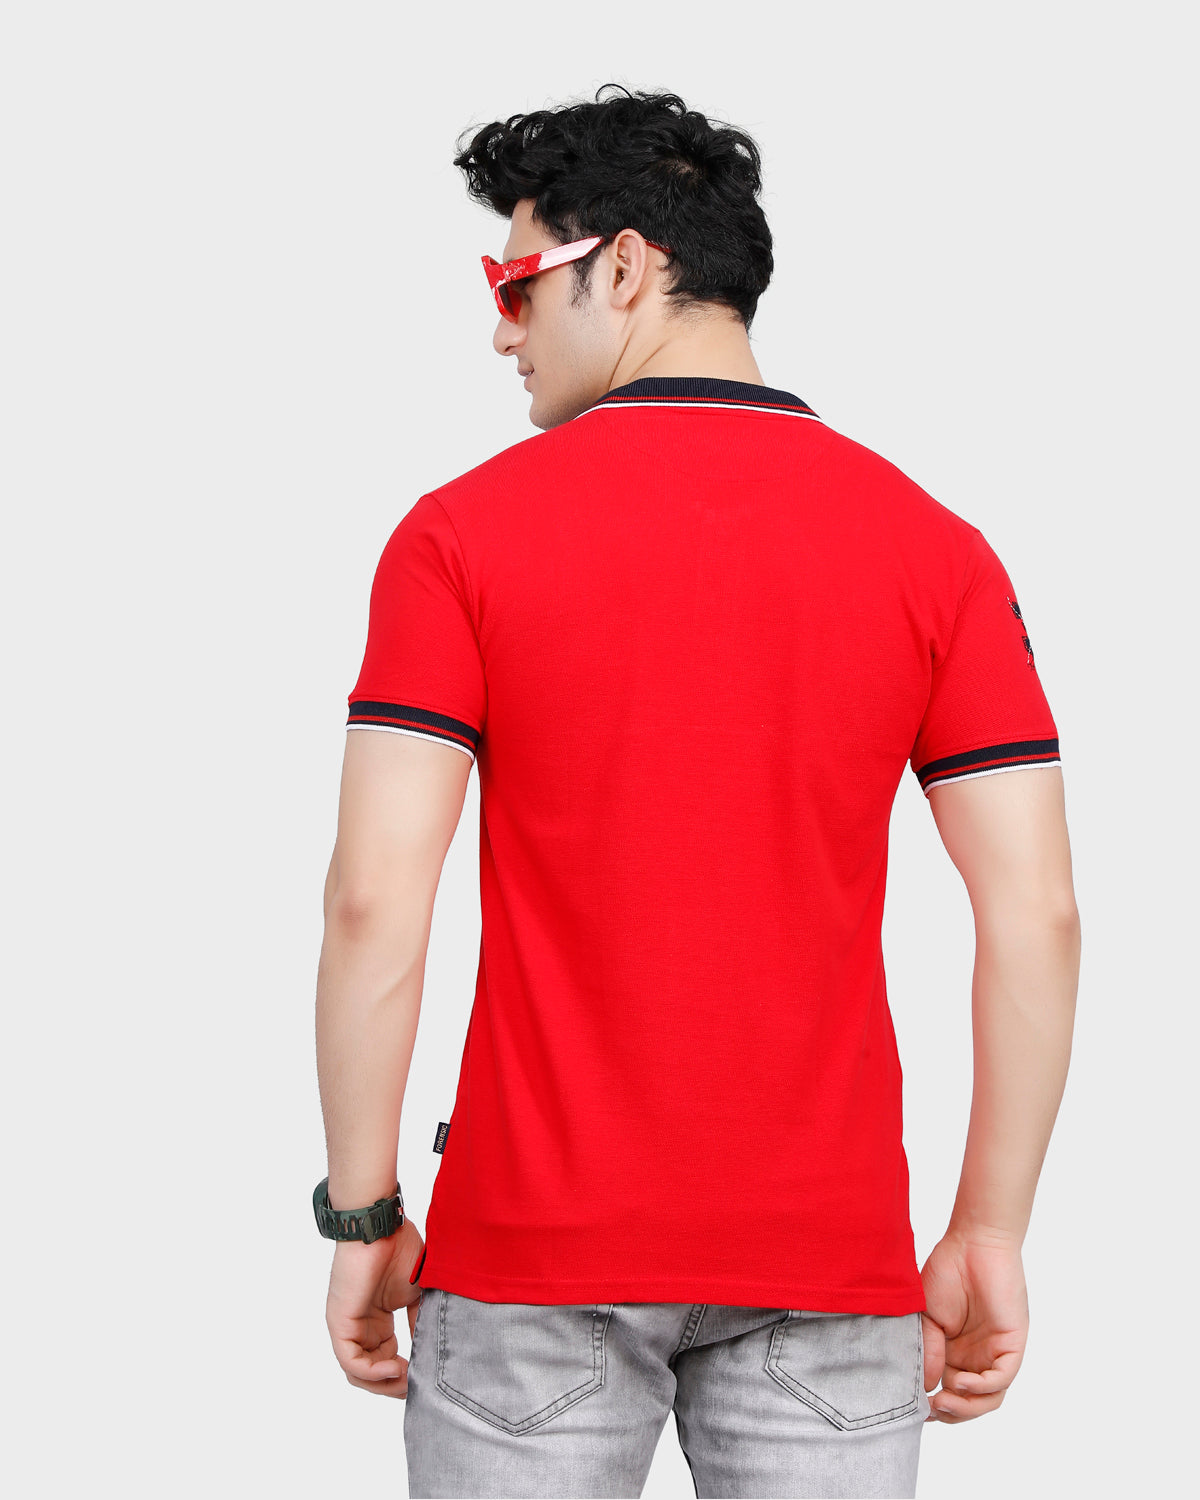 Men's Red Solid Cotton Polo Shirt